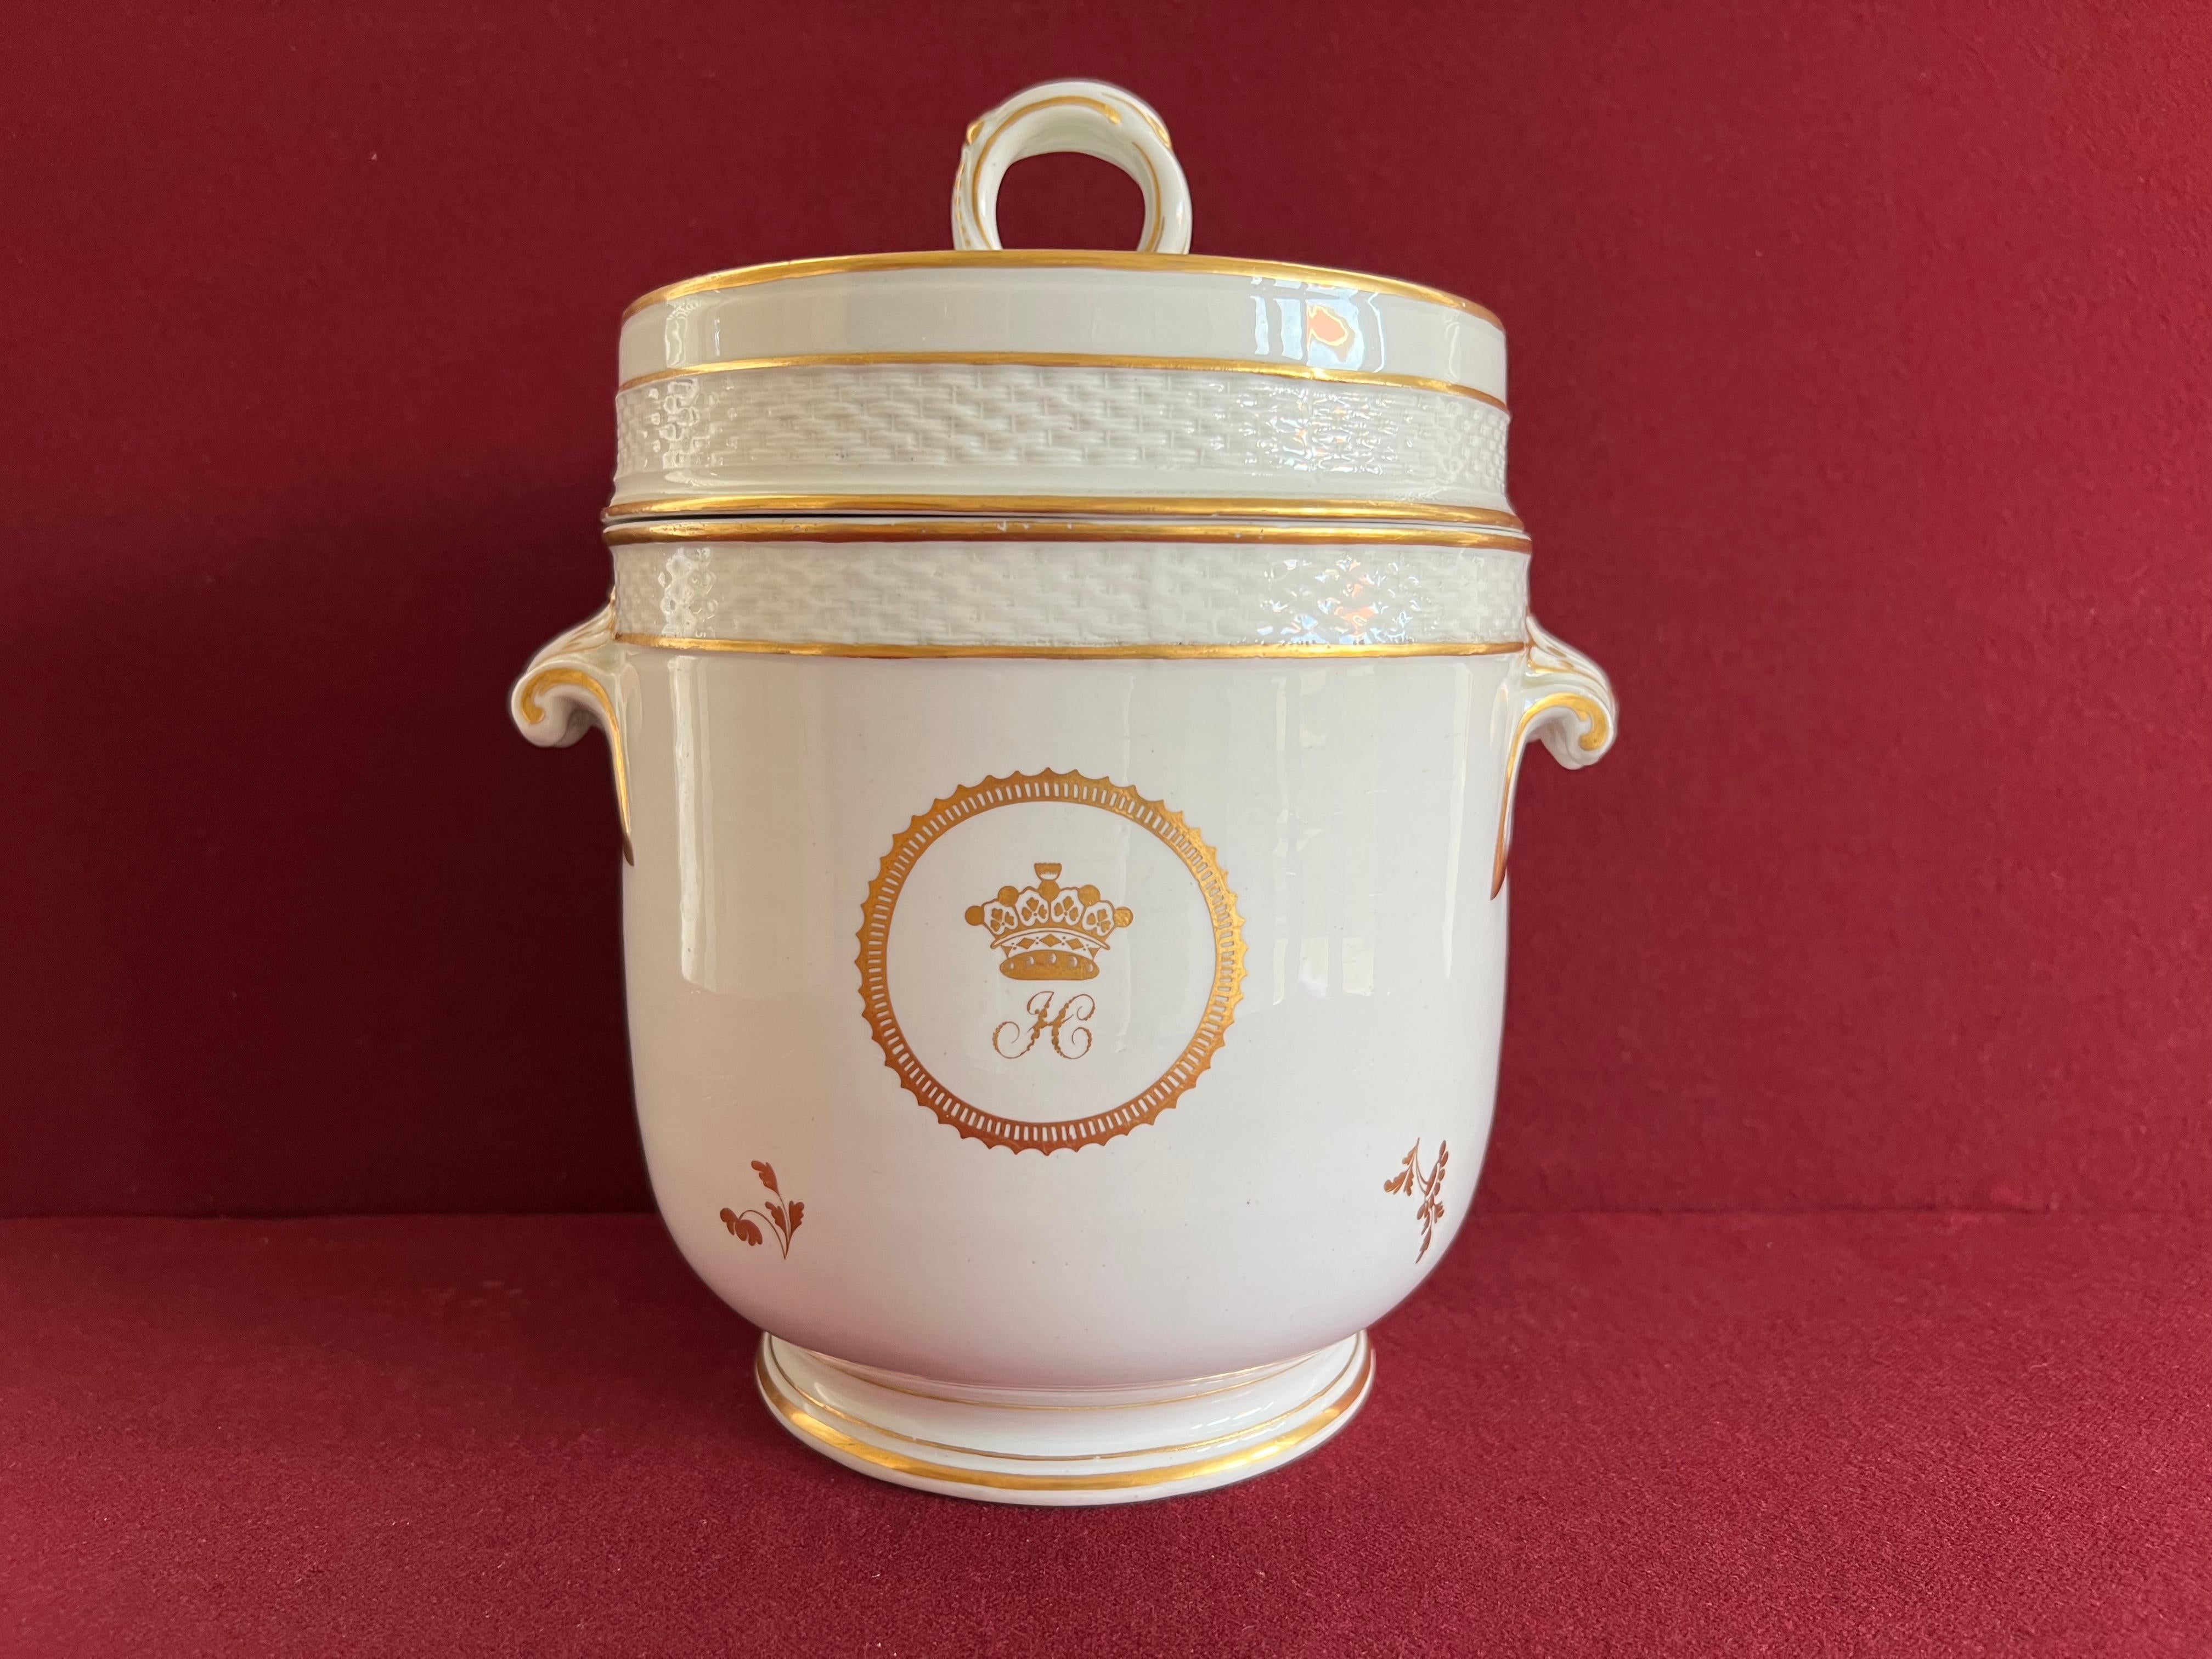 Hand-Painted A fine Derby Porcelain Ice Pail and Cover c.1790